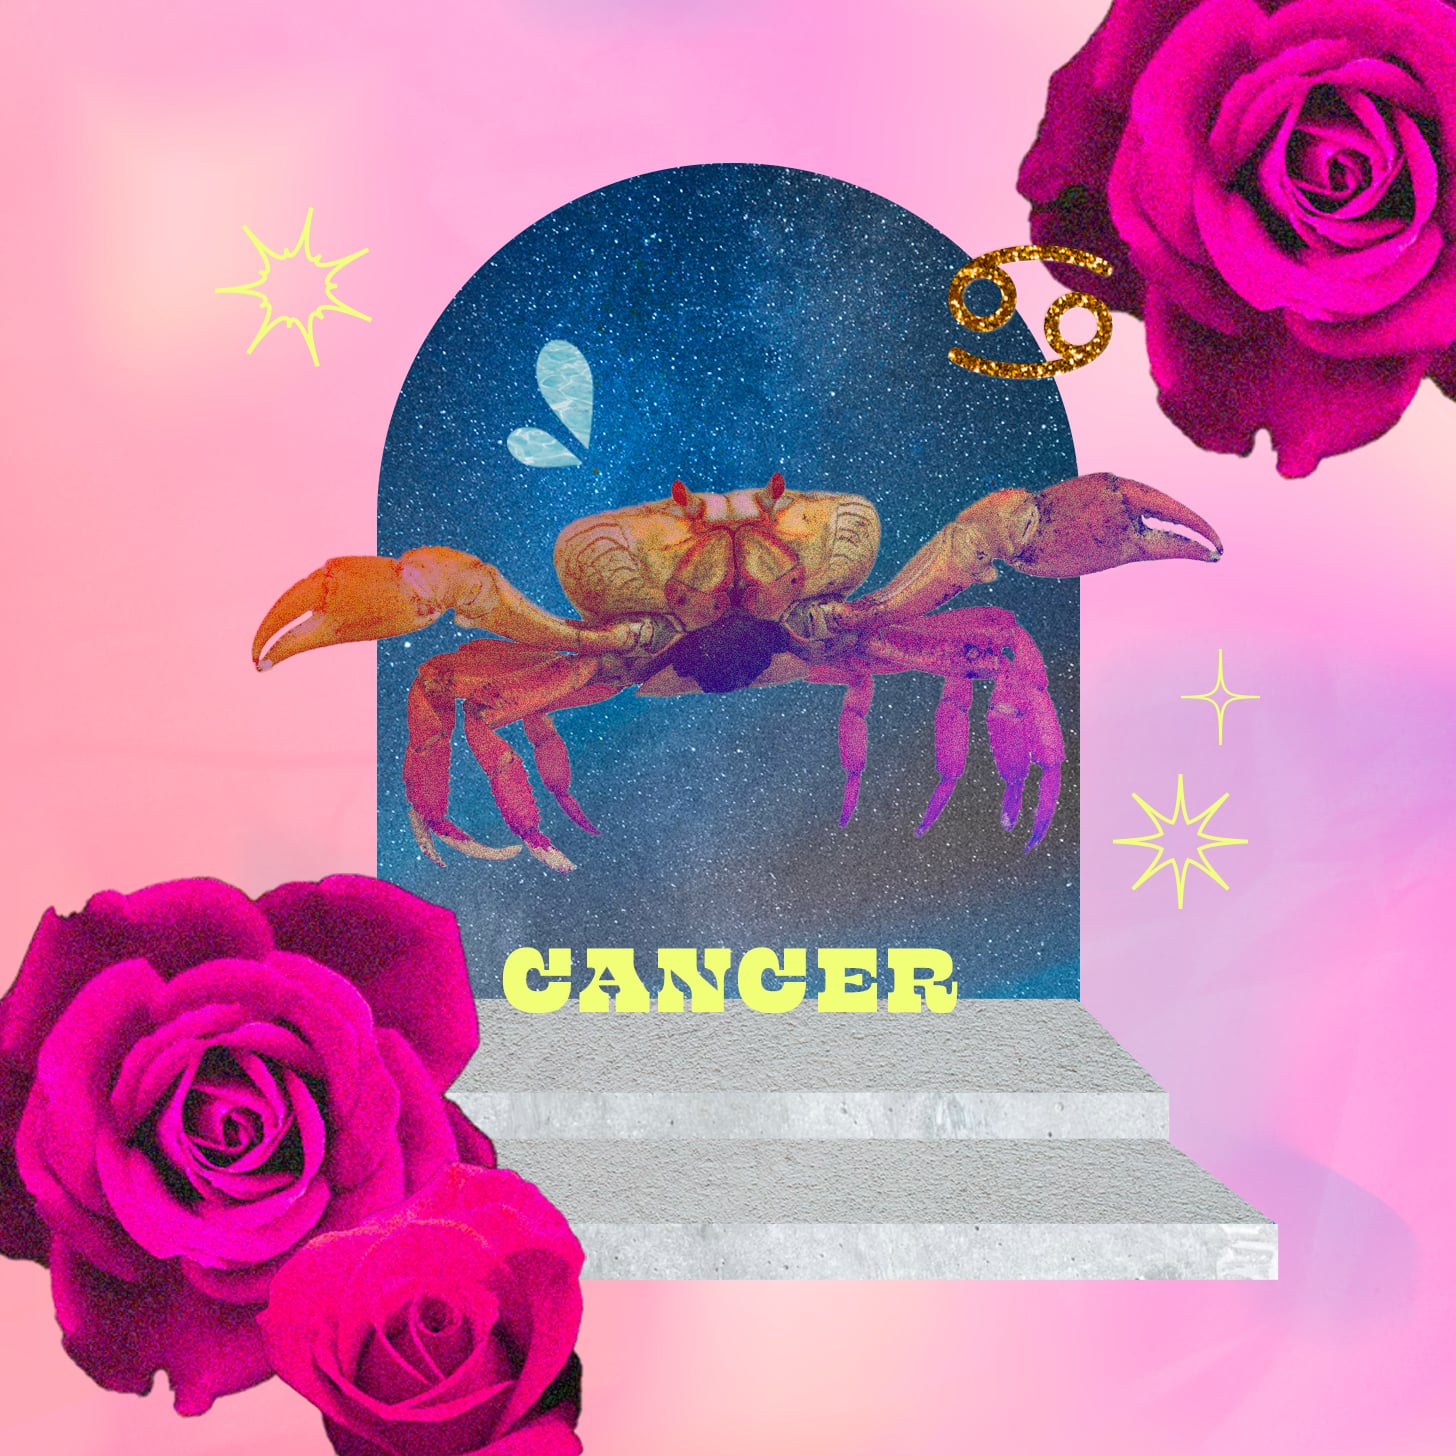 Cancer weekly horoscope for April 24, 2022